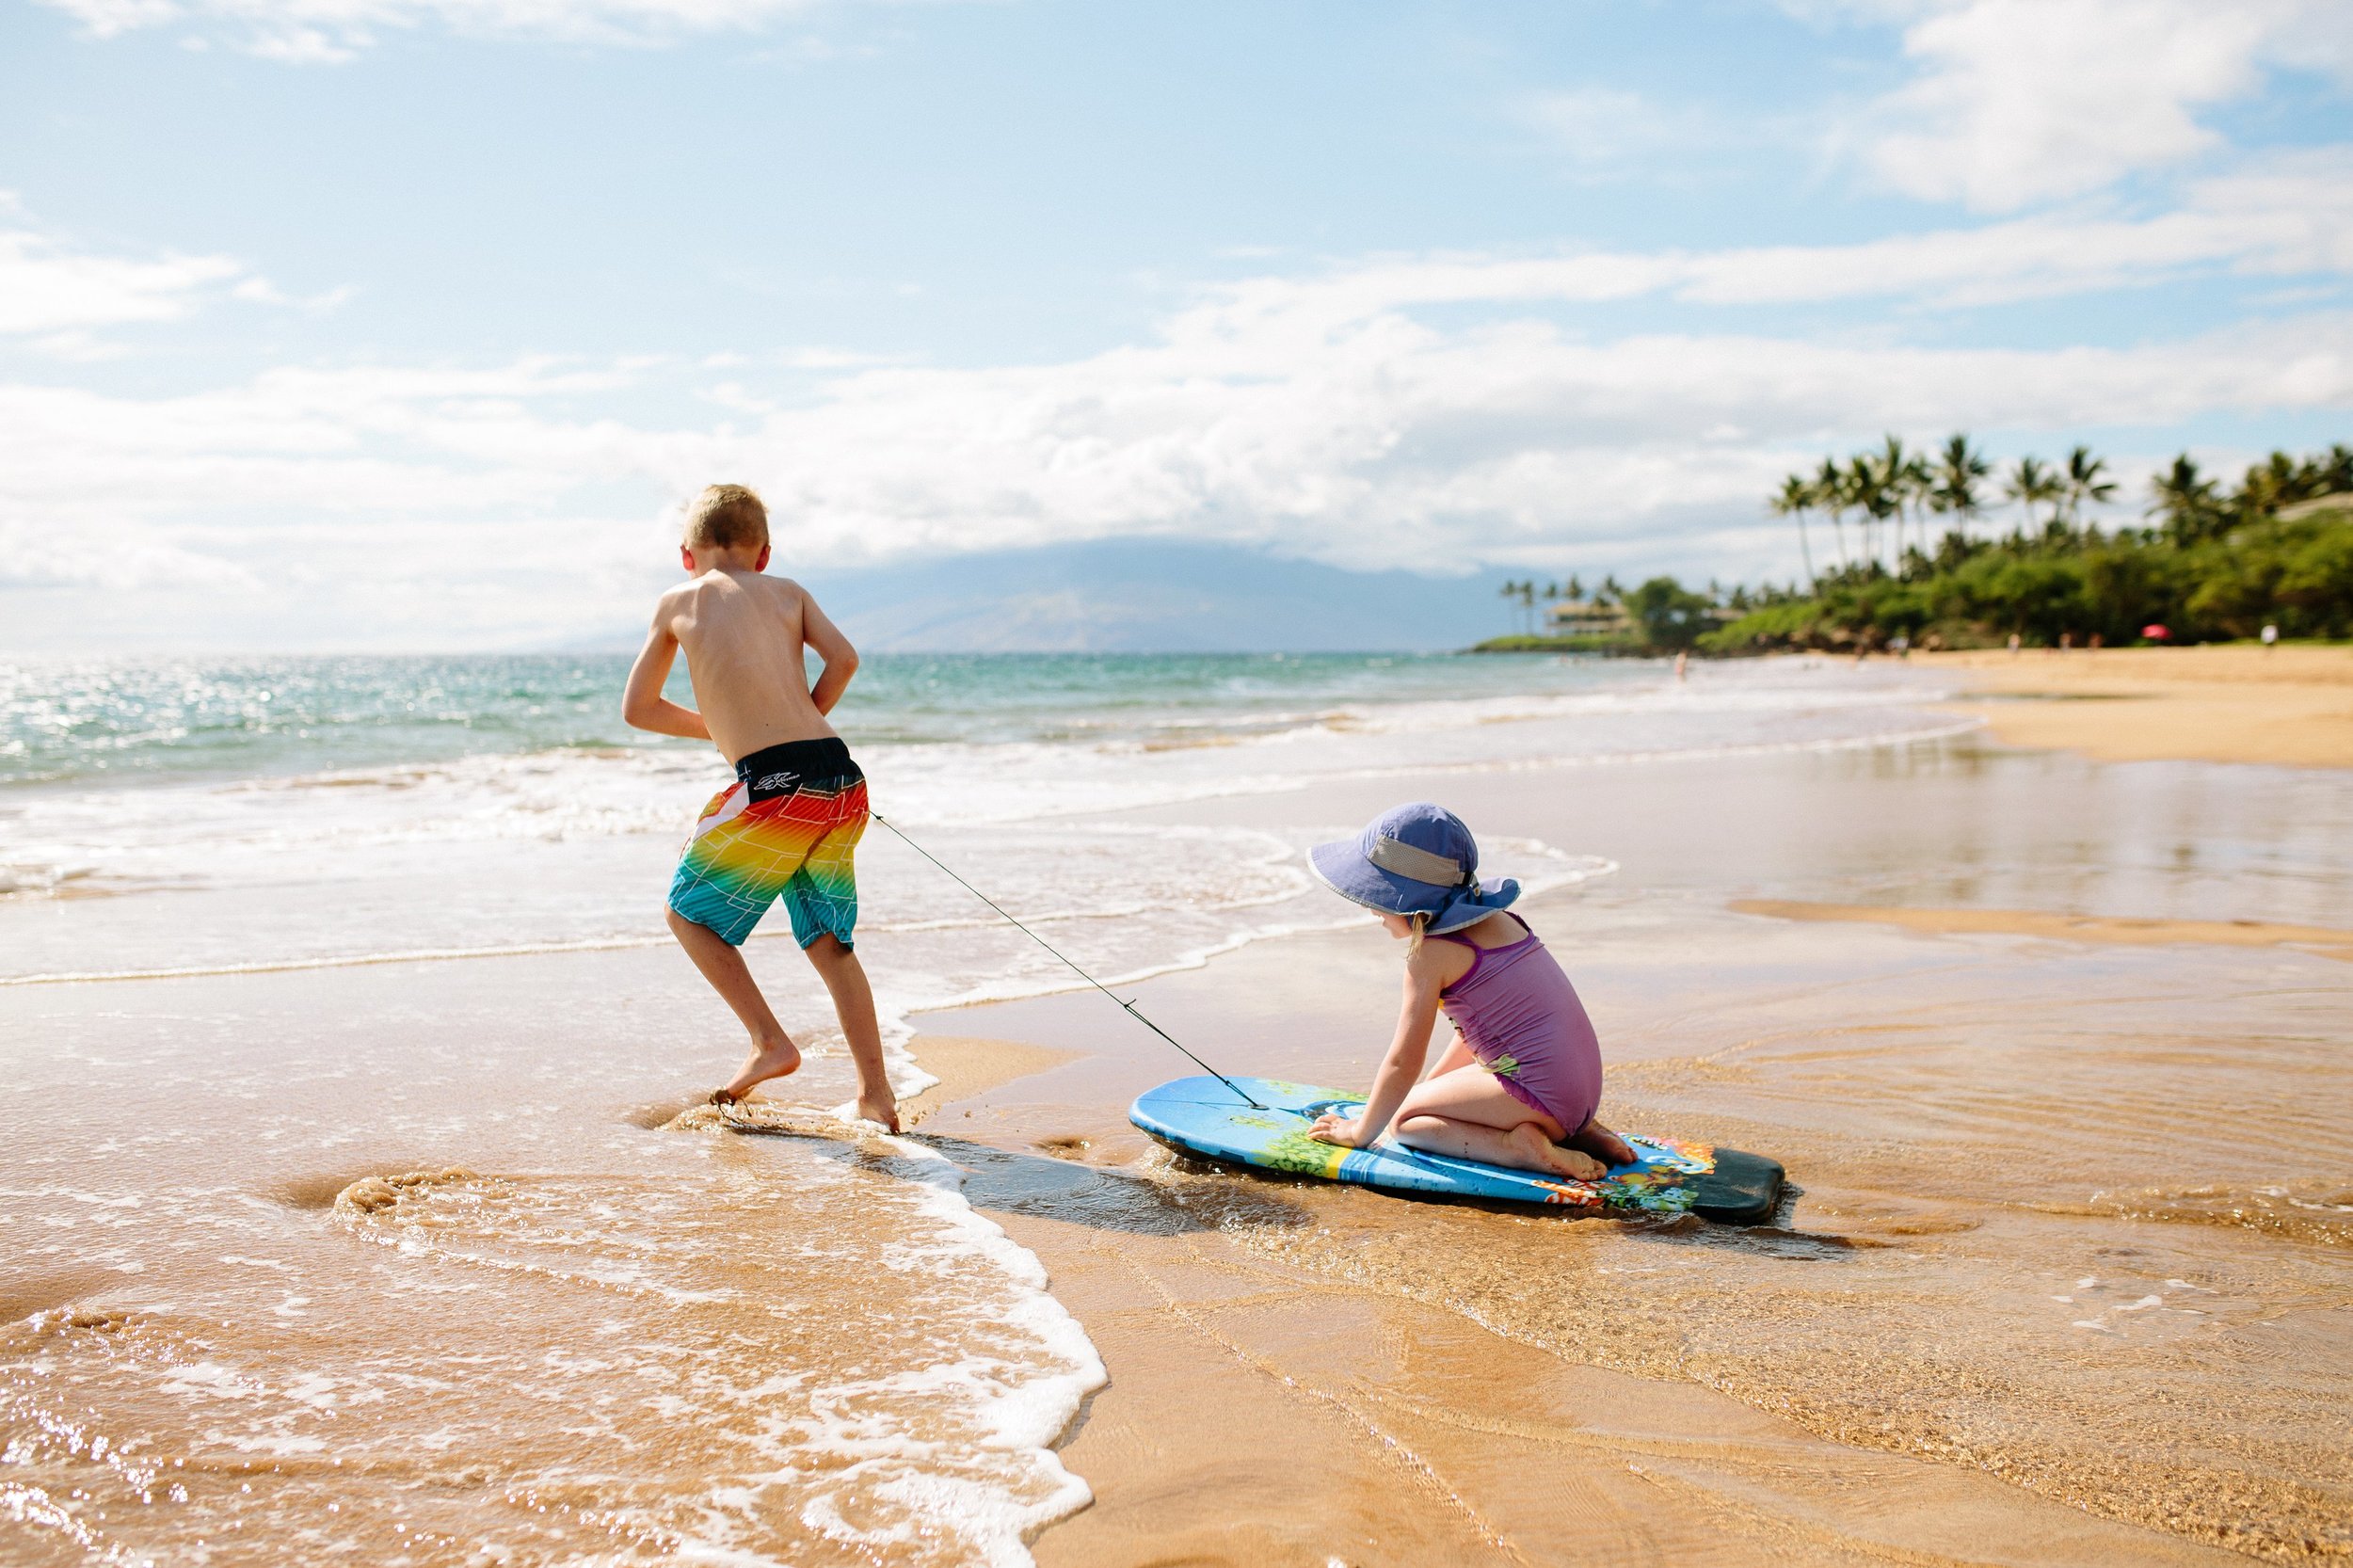 Family Beach Day Photo Session on Maui by Seattle Destionation Lifestyle Photographer Janelle Elaine Photography.jpg